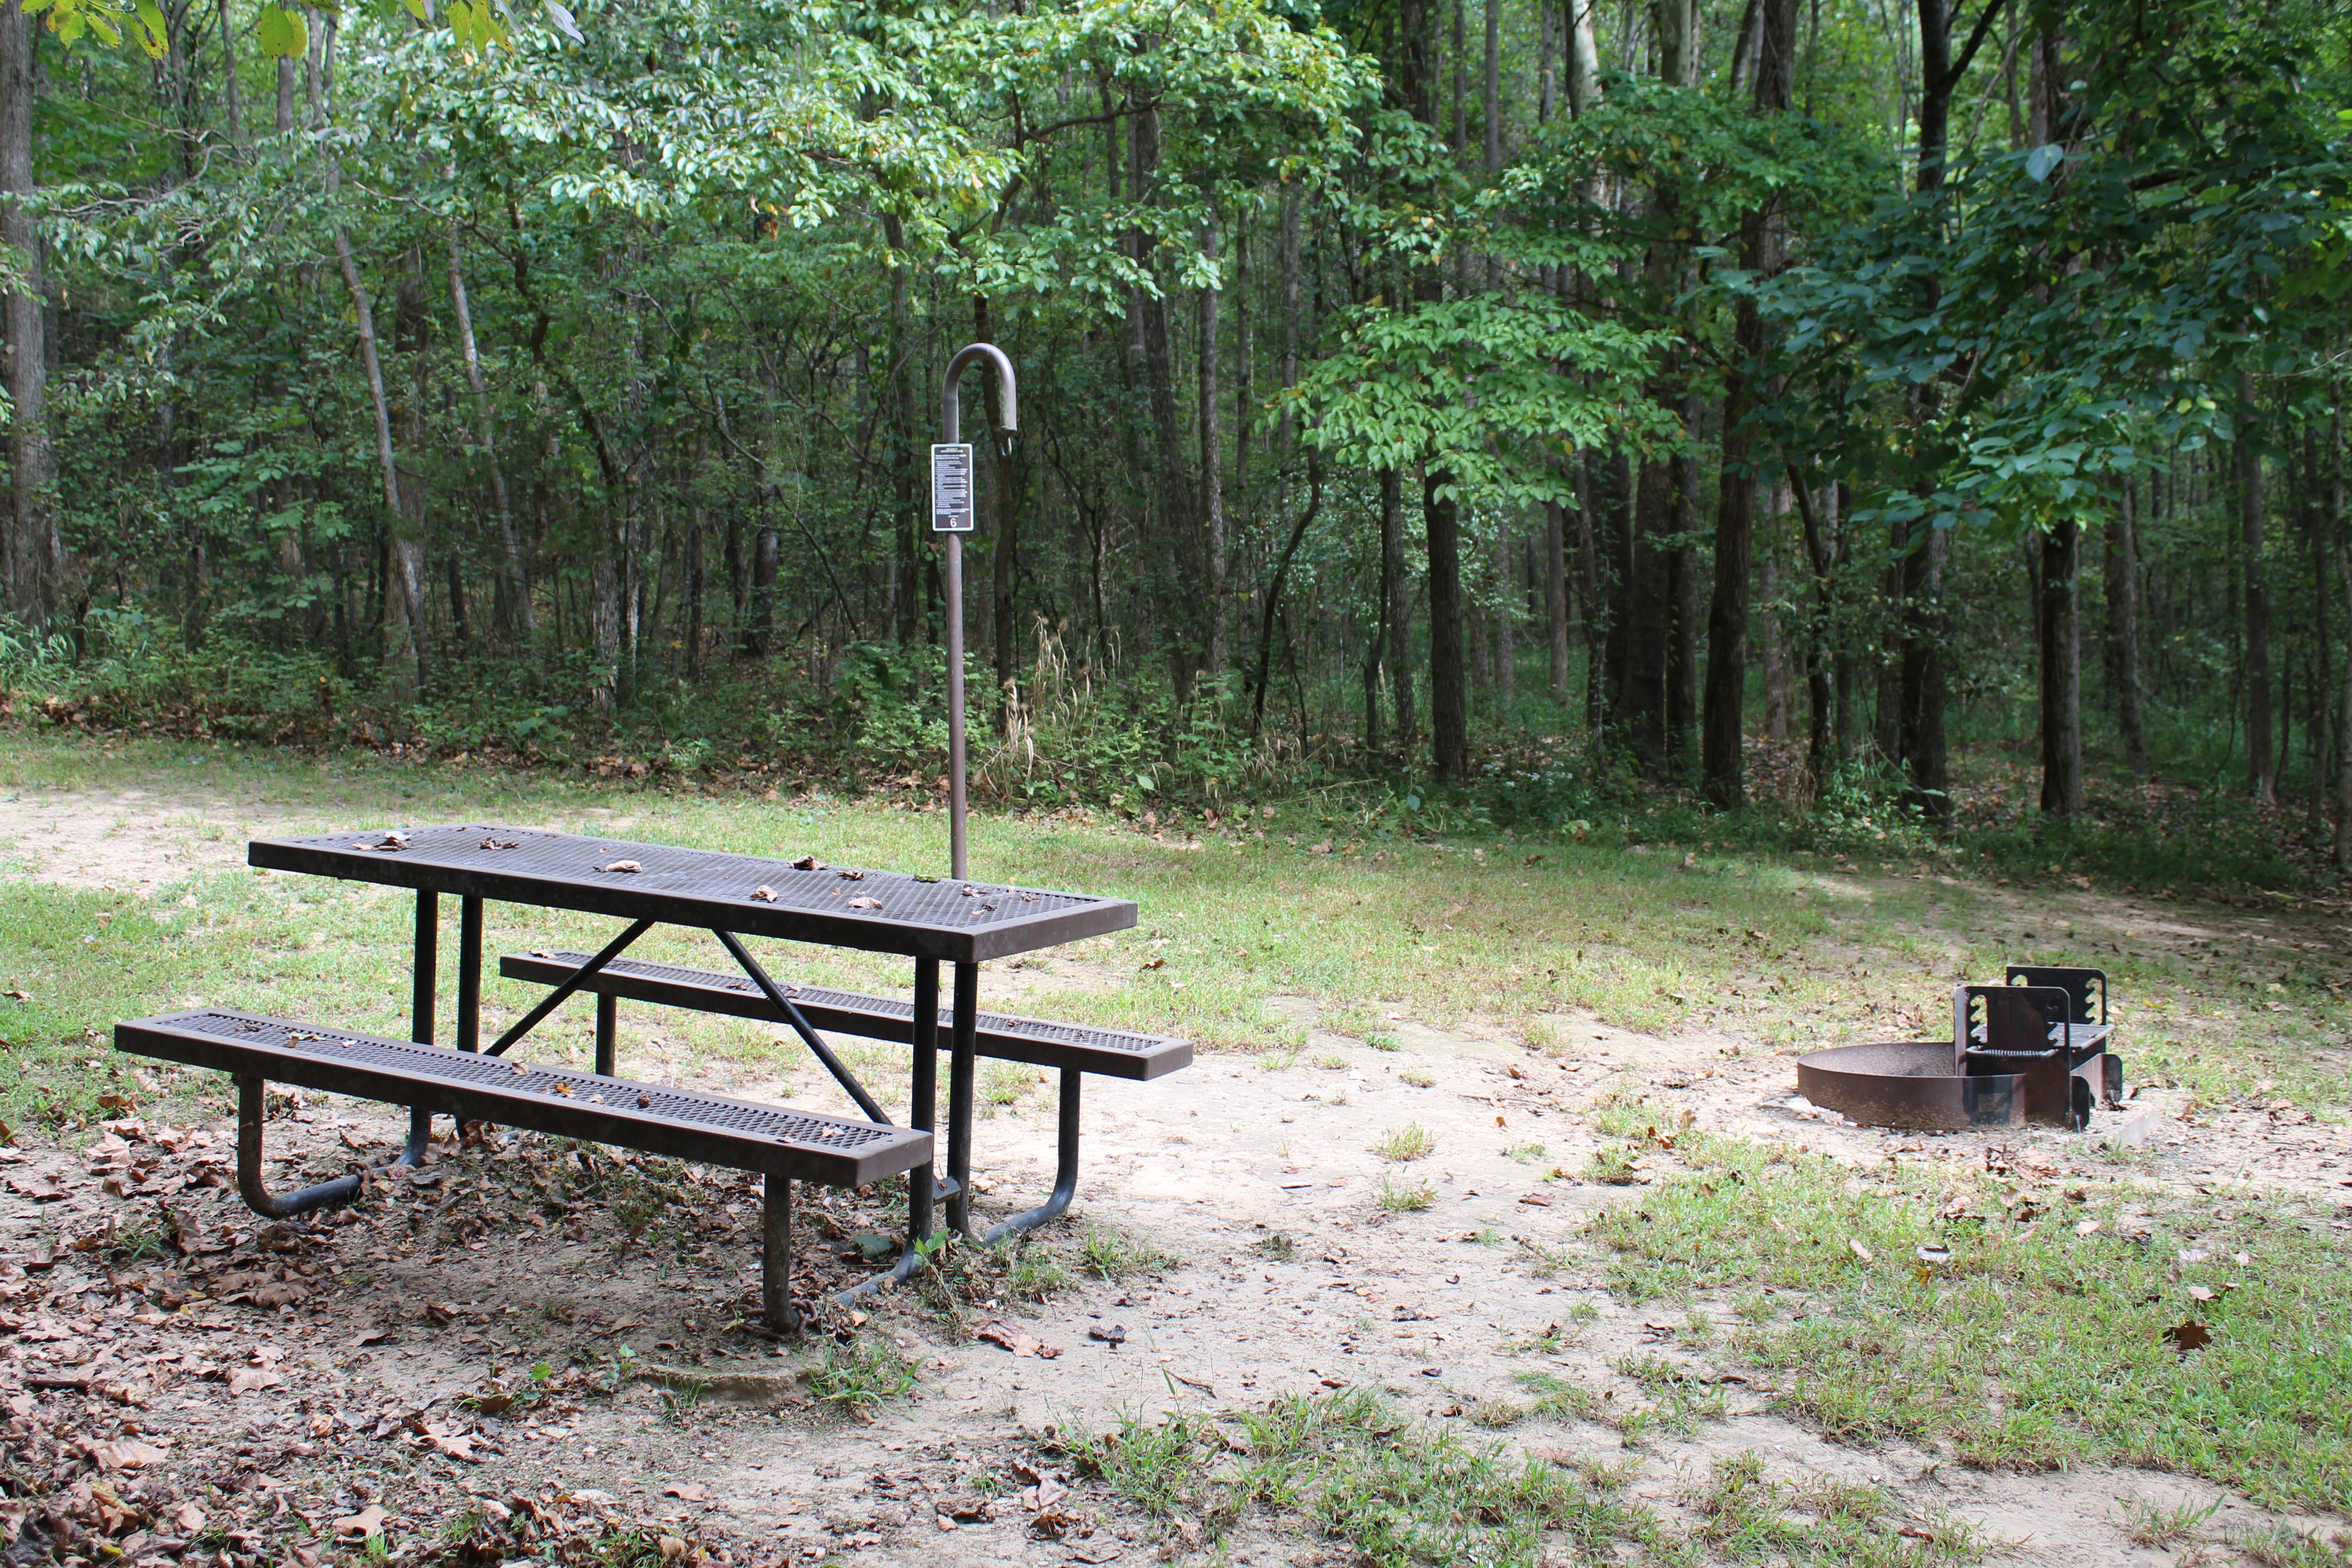 A picnic table and fire pit on a sandy grassy surface with forest surrounding.